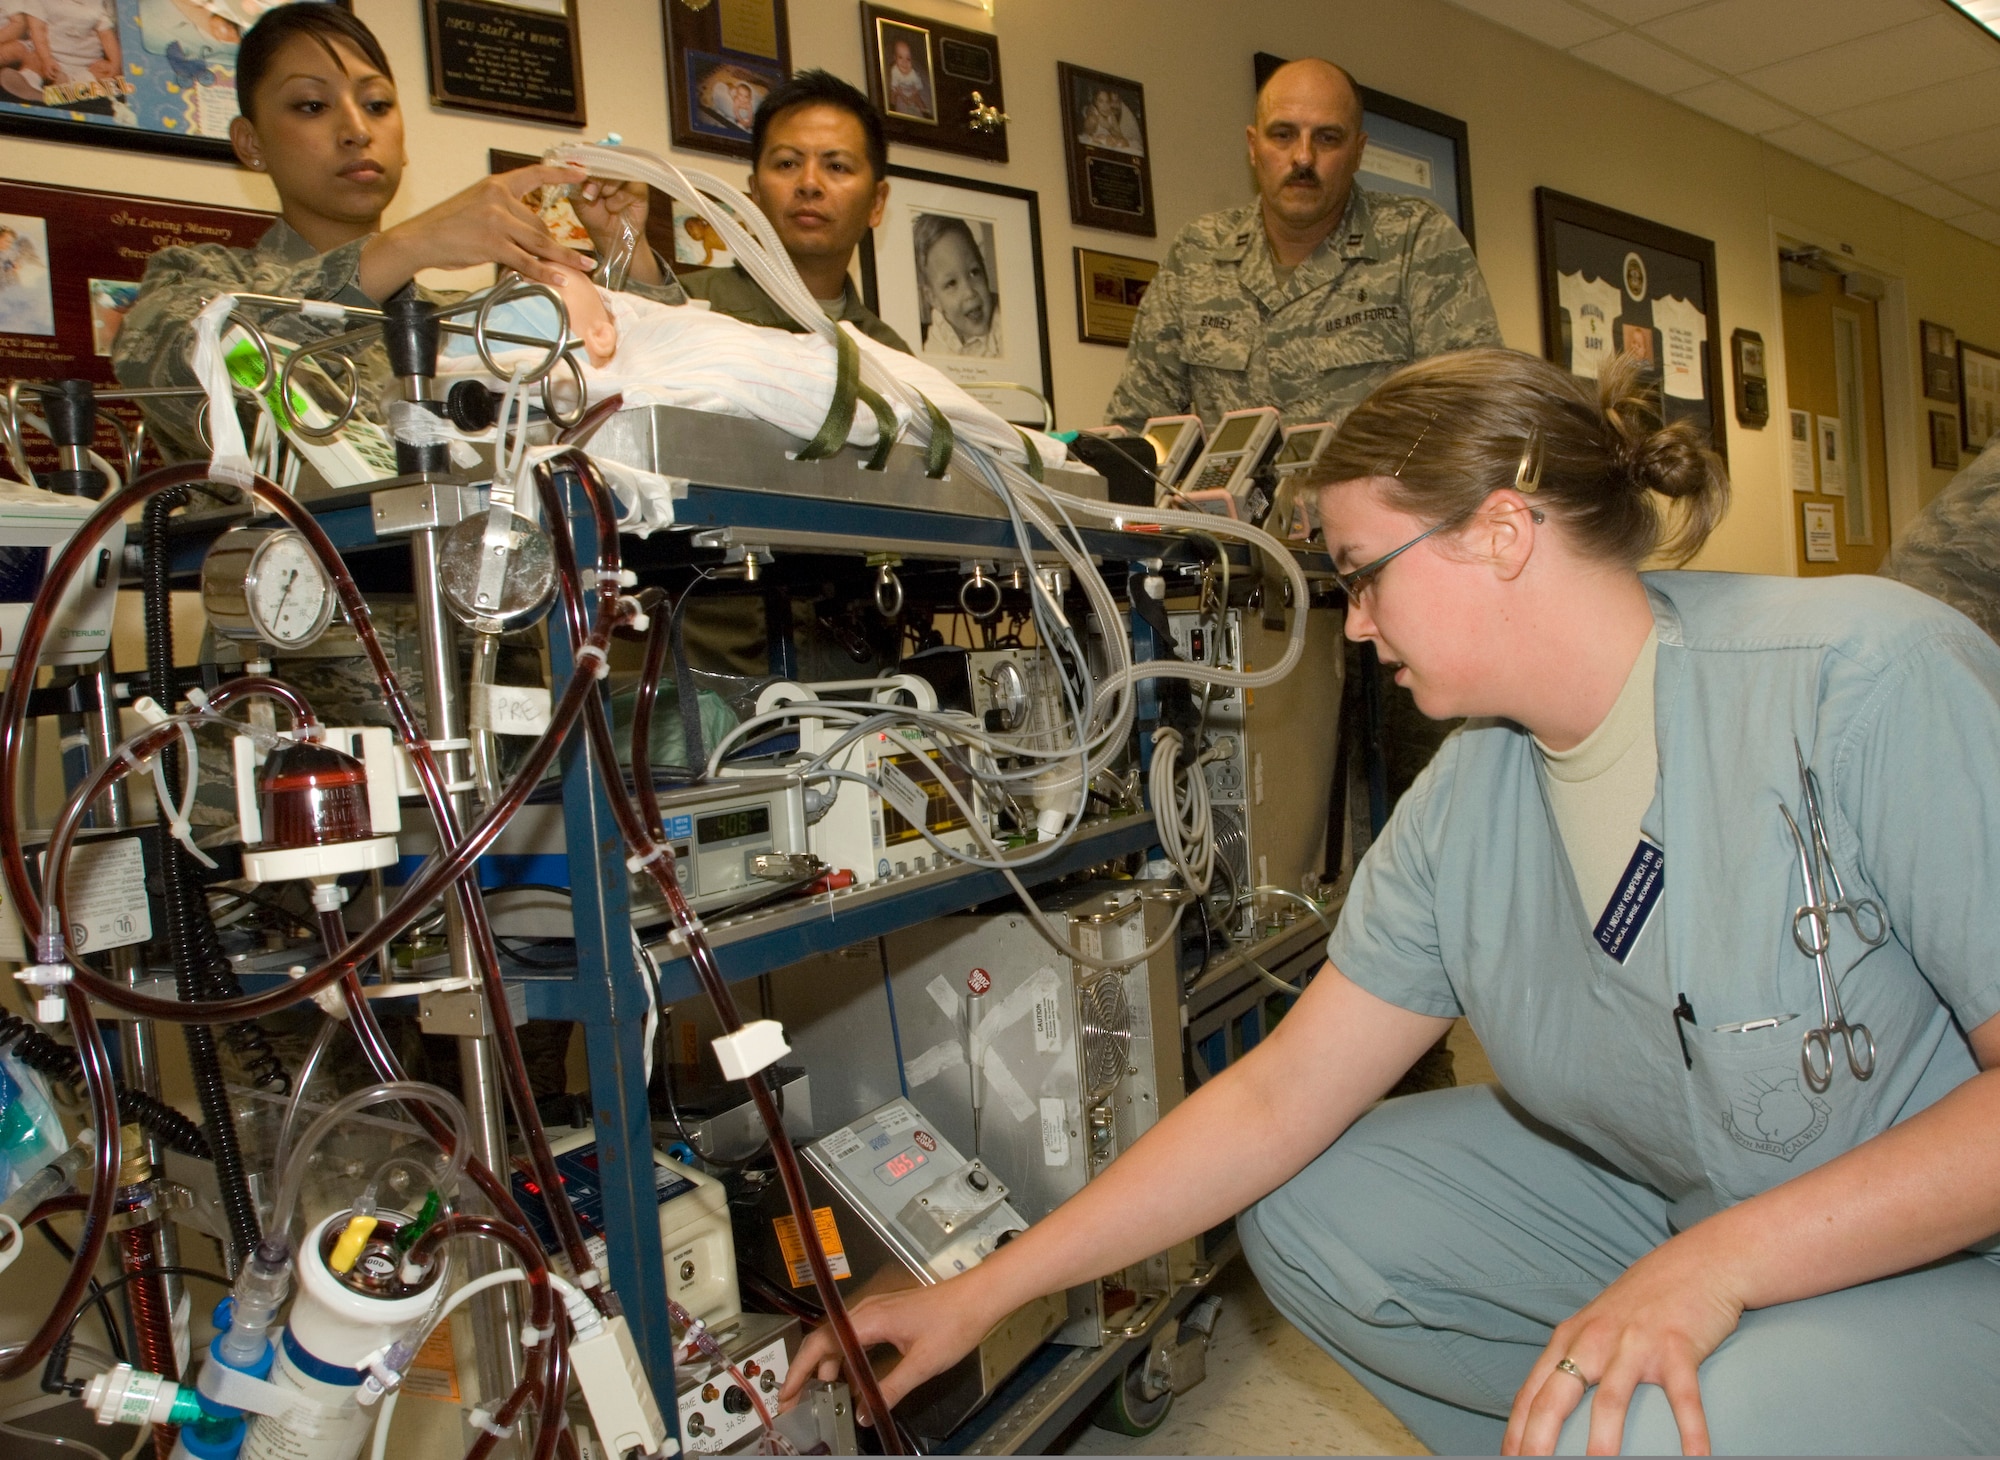 Members of the 59th Medical Wing Extra-Corporeal Membrane Oxygenation (ECMO) clinical care support team inspect an ECMO machine during an exercise on July 1, 2009, at Wilford Hall Medical Center, at Lackland Air Force Base, Texas. The ECMO machine is a heart-lung bypass device that circulates and oxygenates the blood, giving diseased or damaged lungs a chance to heal. (U.S. Air Force Photo/Staff Sgt. Robert Barnett)